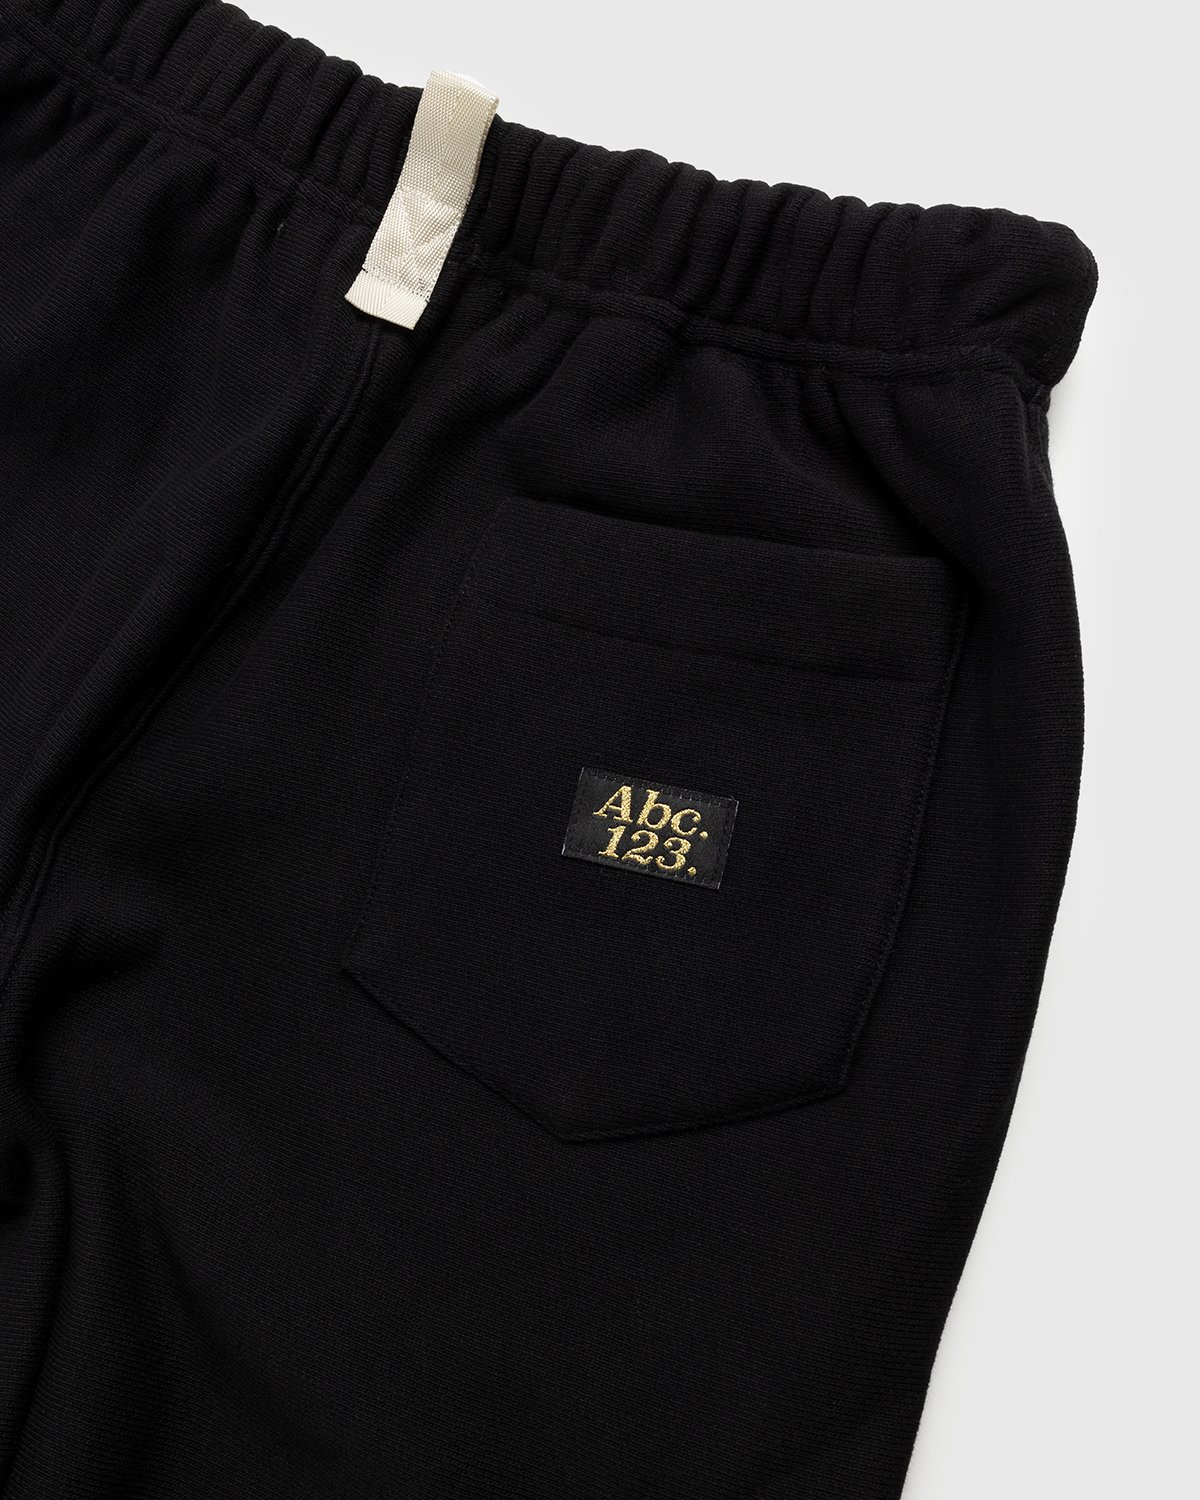 Abc. - French Terry Sweatpants Anthracite - Clothing - Black - Image 7